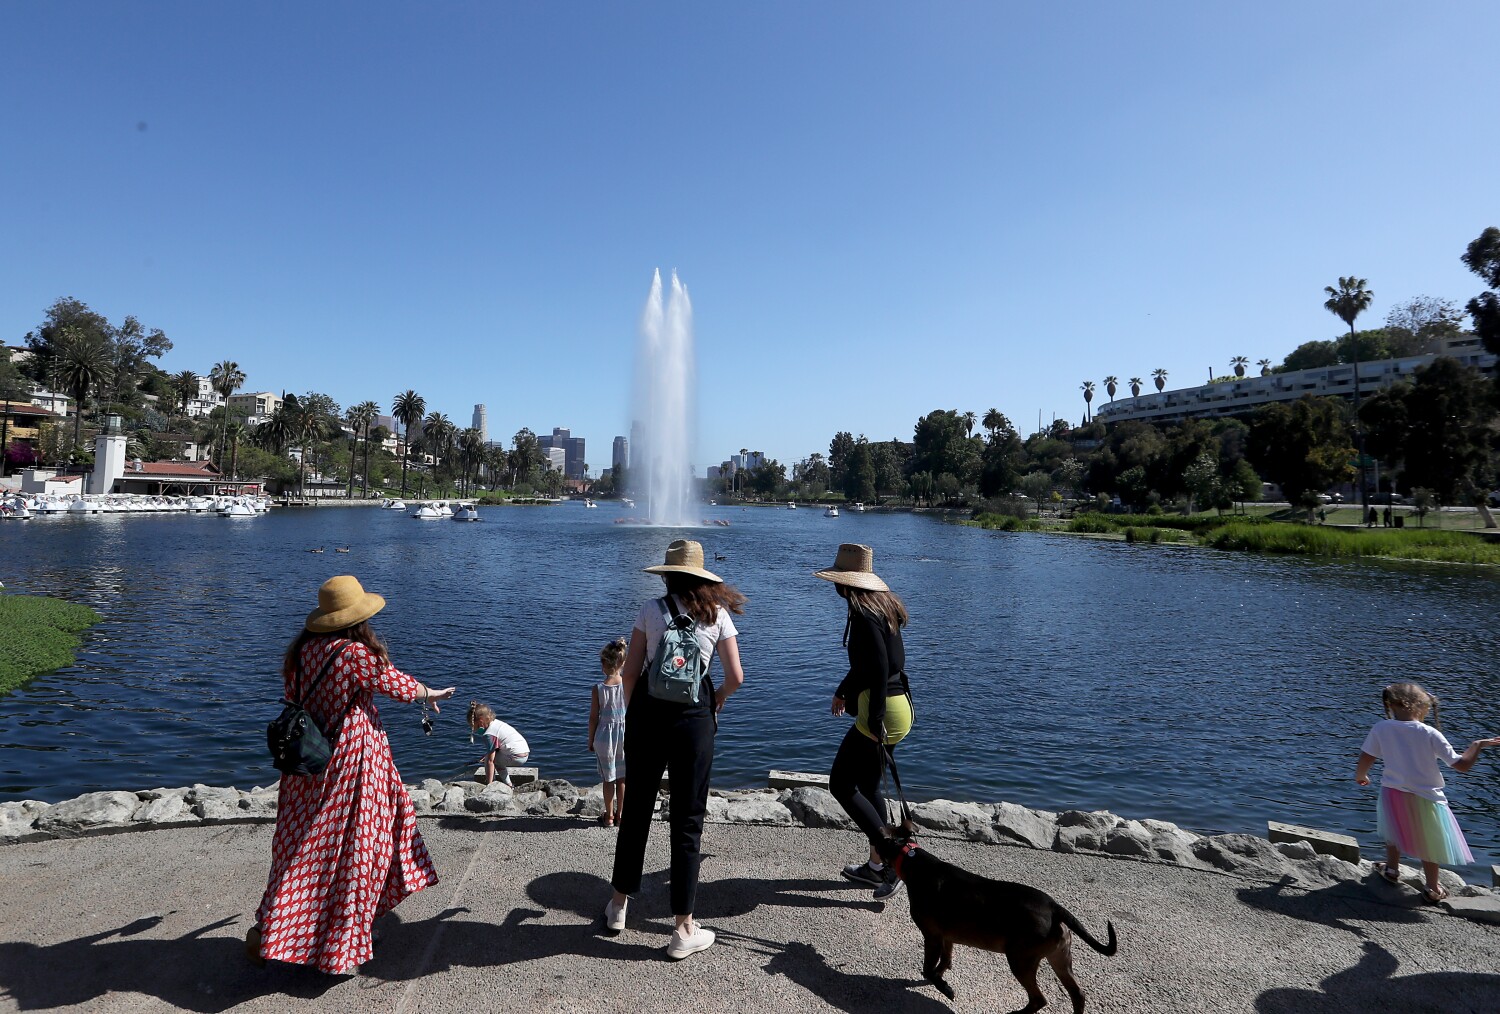 Echo Park Lake reopens, with new grass, new paint and no tents